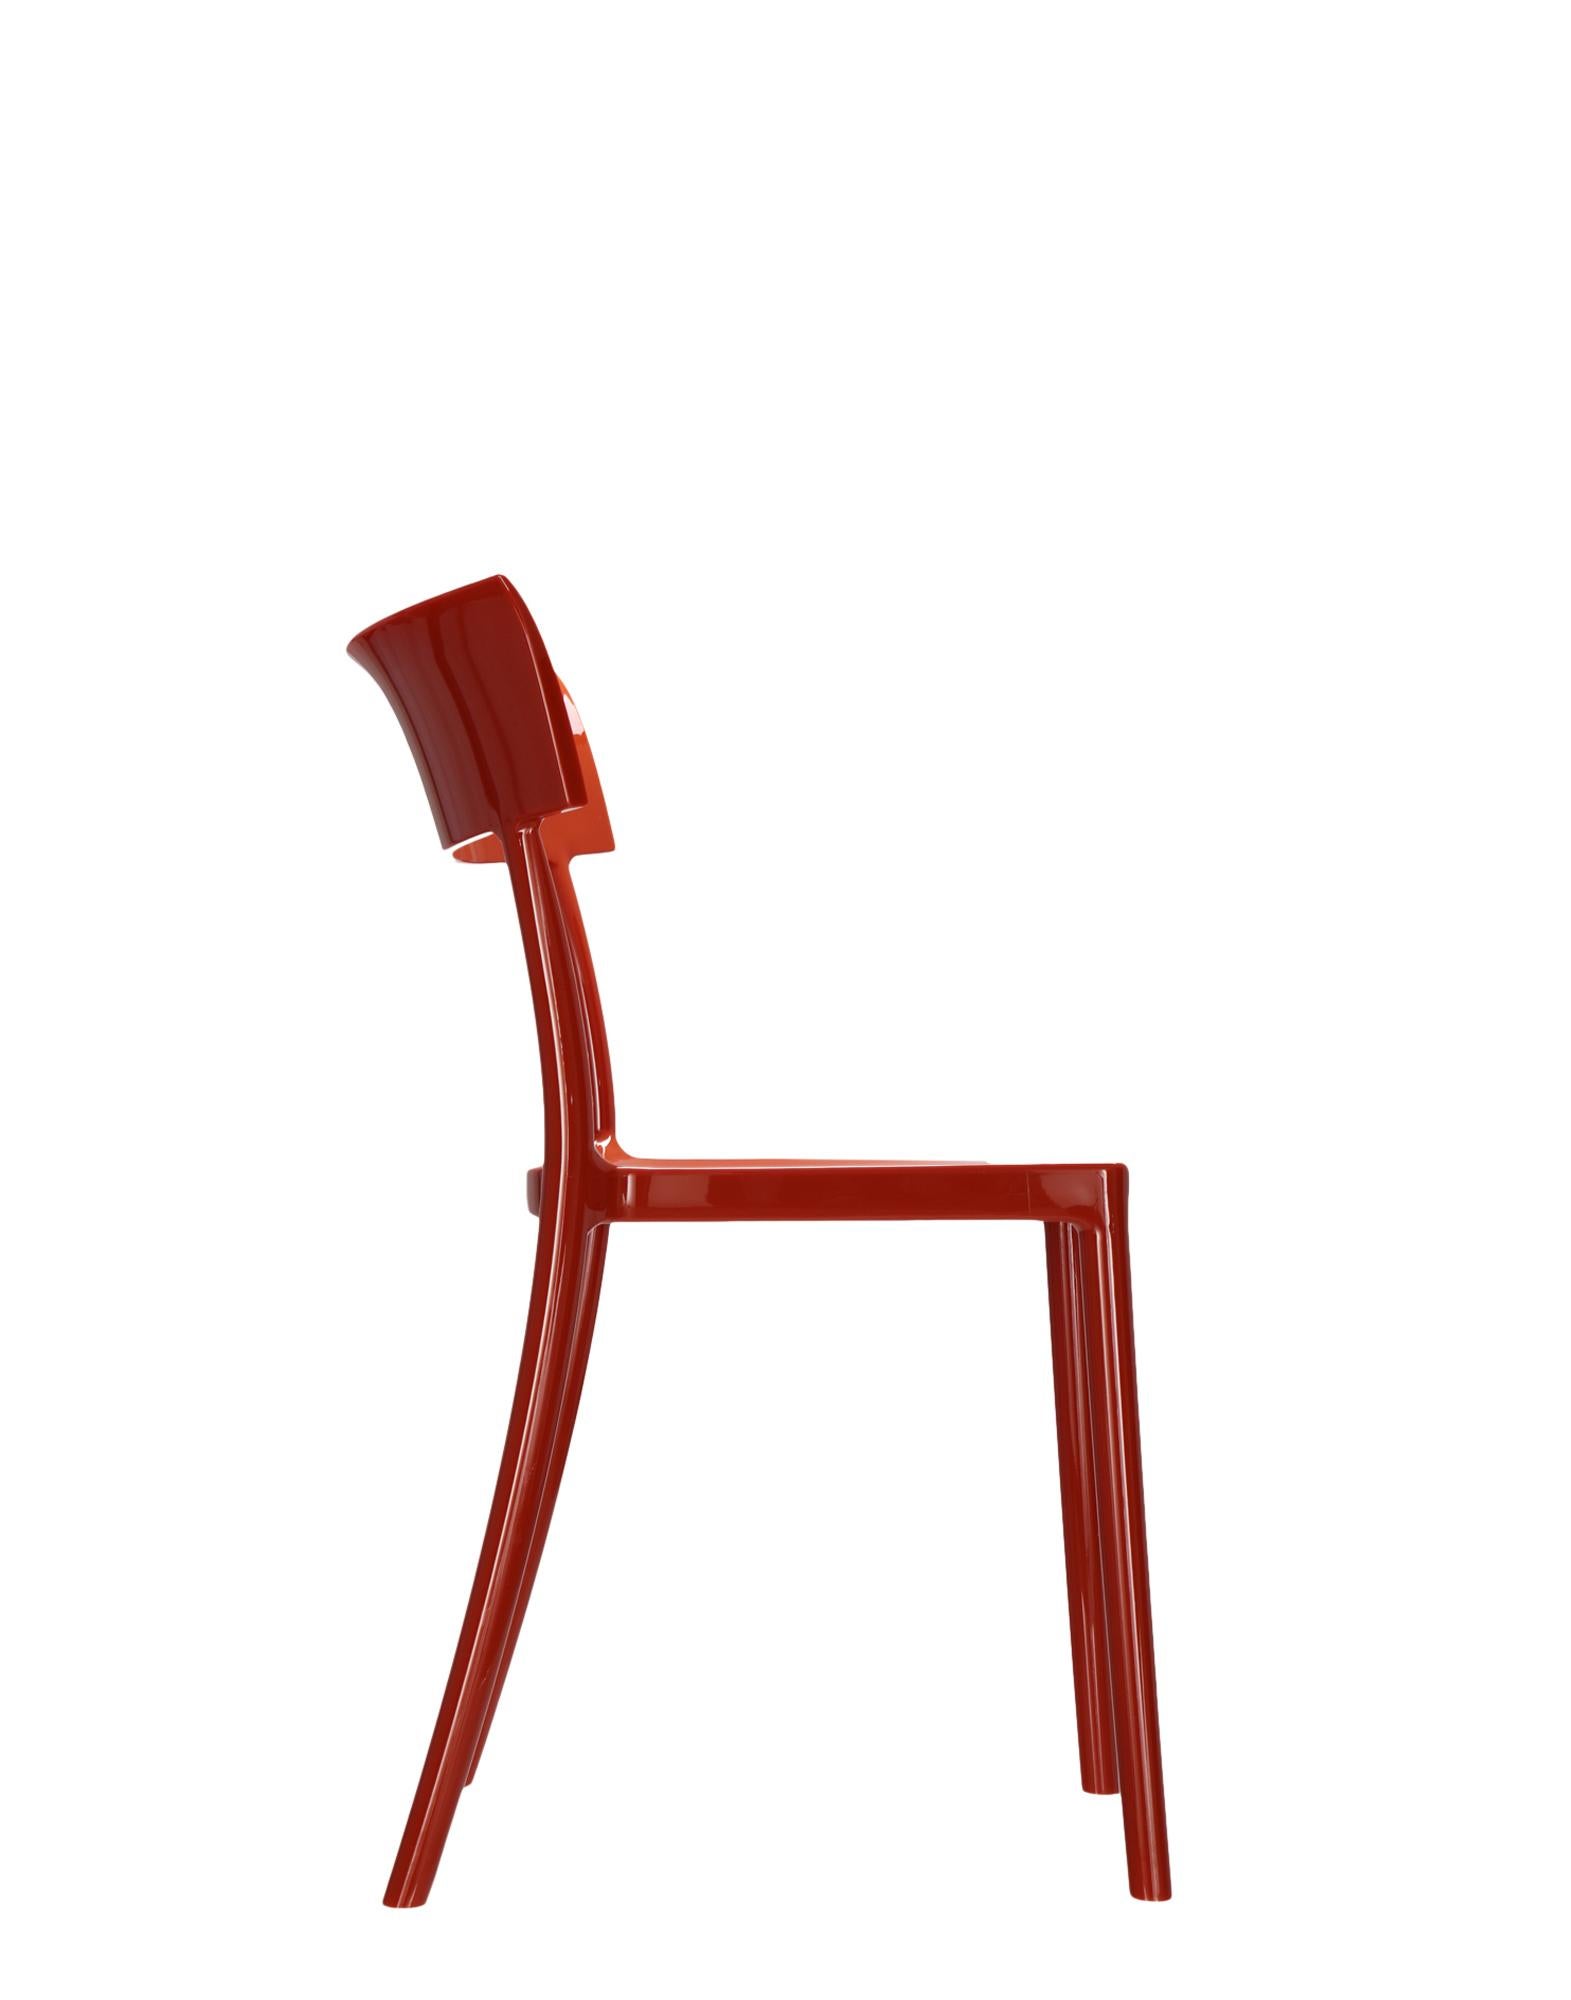 Italian Kartell Cat Walk Chair in Rusty Orange by Philippe Starck with Sergio Schito For Sale